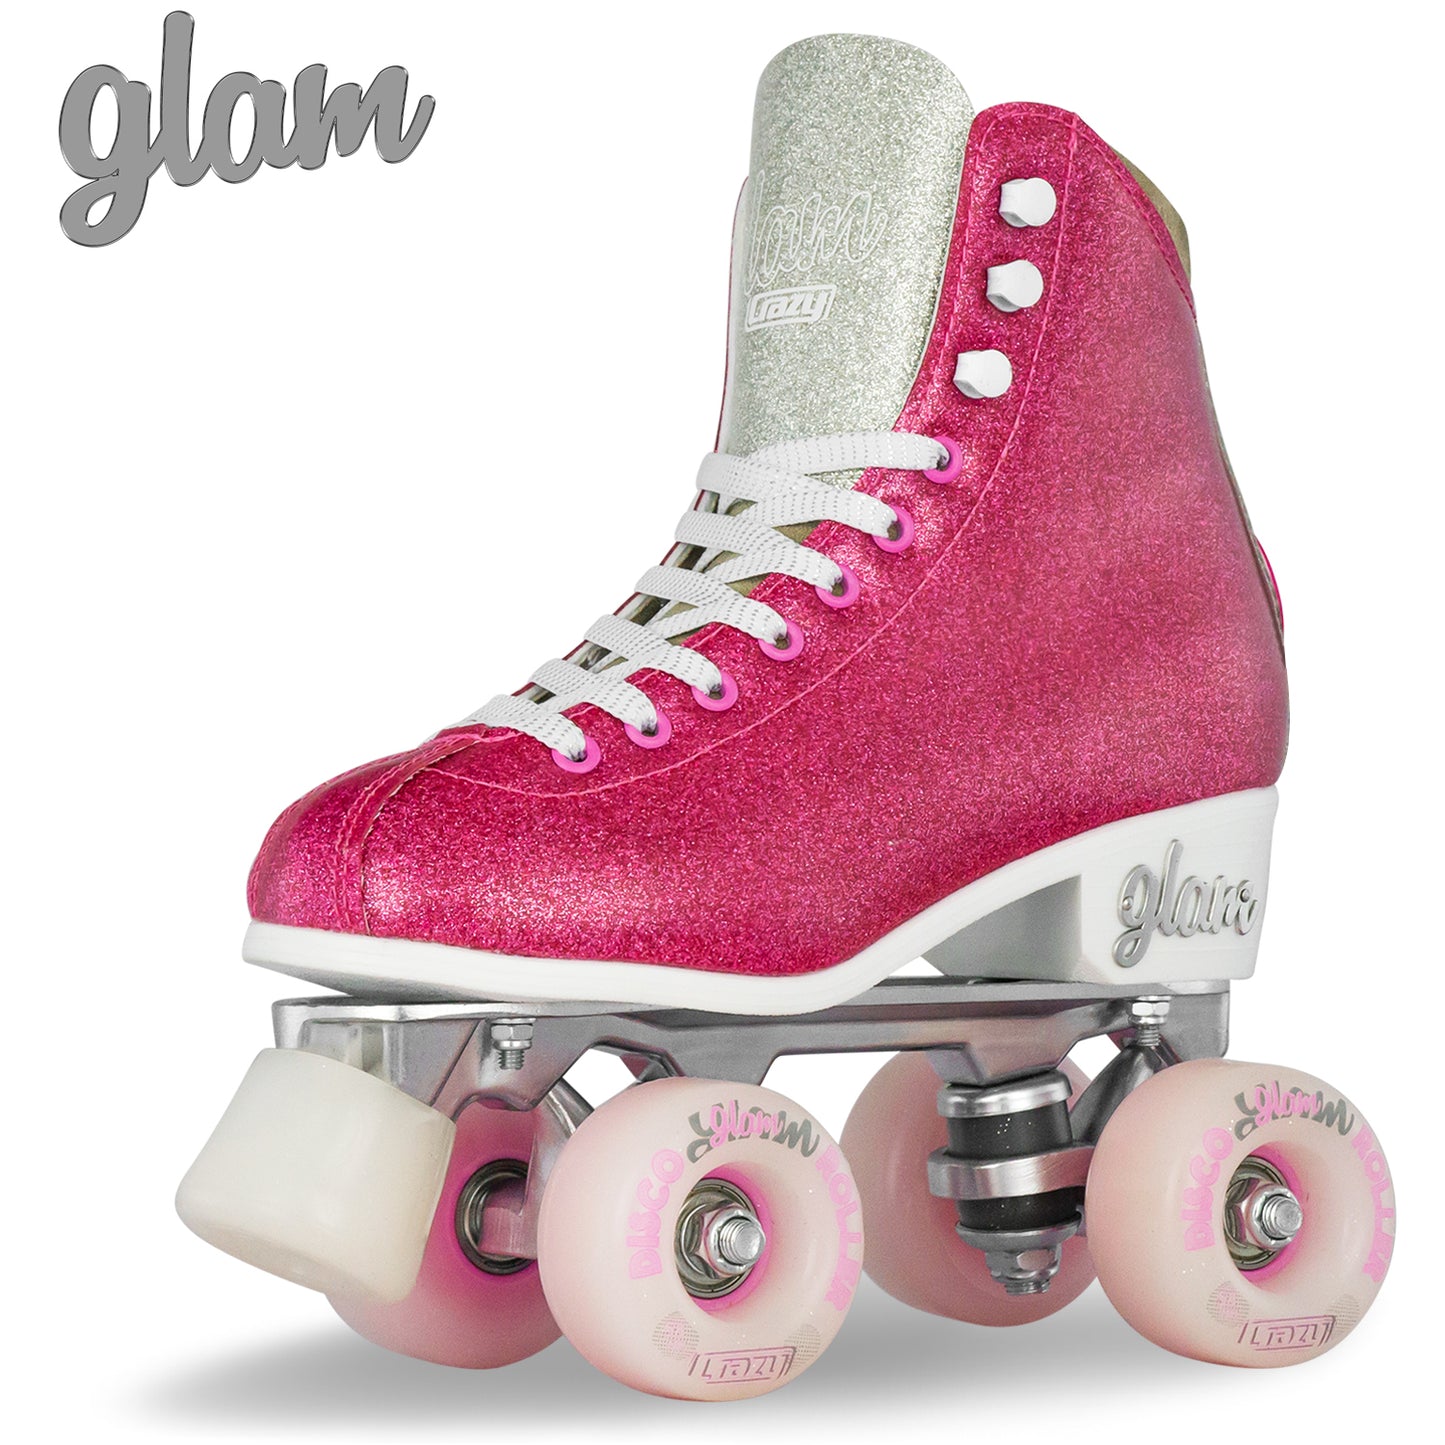 The Glam Skate is a serious skate - with a lustrous glitter shine over the entire boot. Built in a classic style, the Glam is far from your traditional roller skate - it comes packed full of great skating features to make skating more comfortable, more controlled and more glamourous than ever before! Don't be afraid to show the word how sparkly, glittery and fun you are on your new Glam Skates by Crazy Skates.